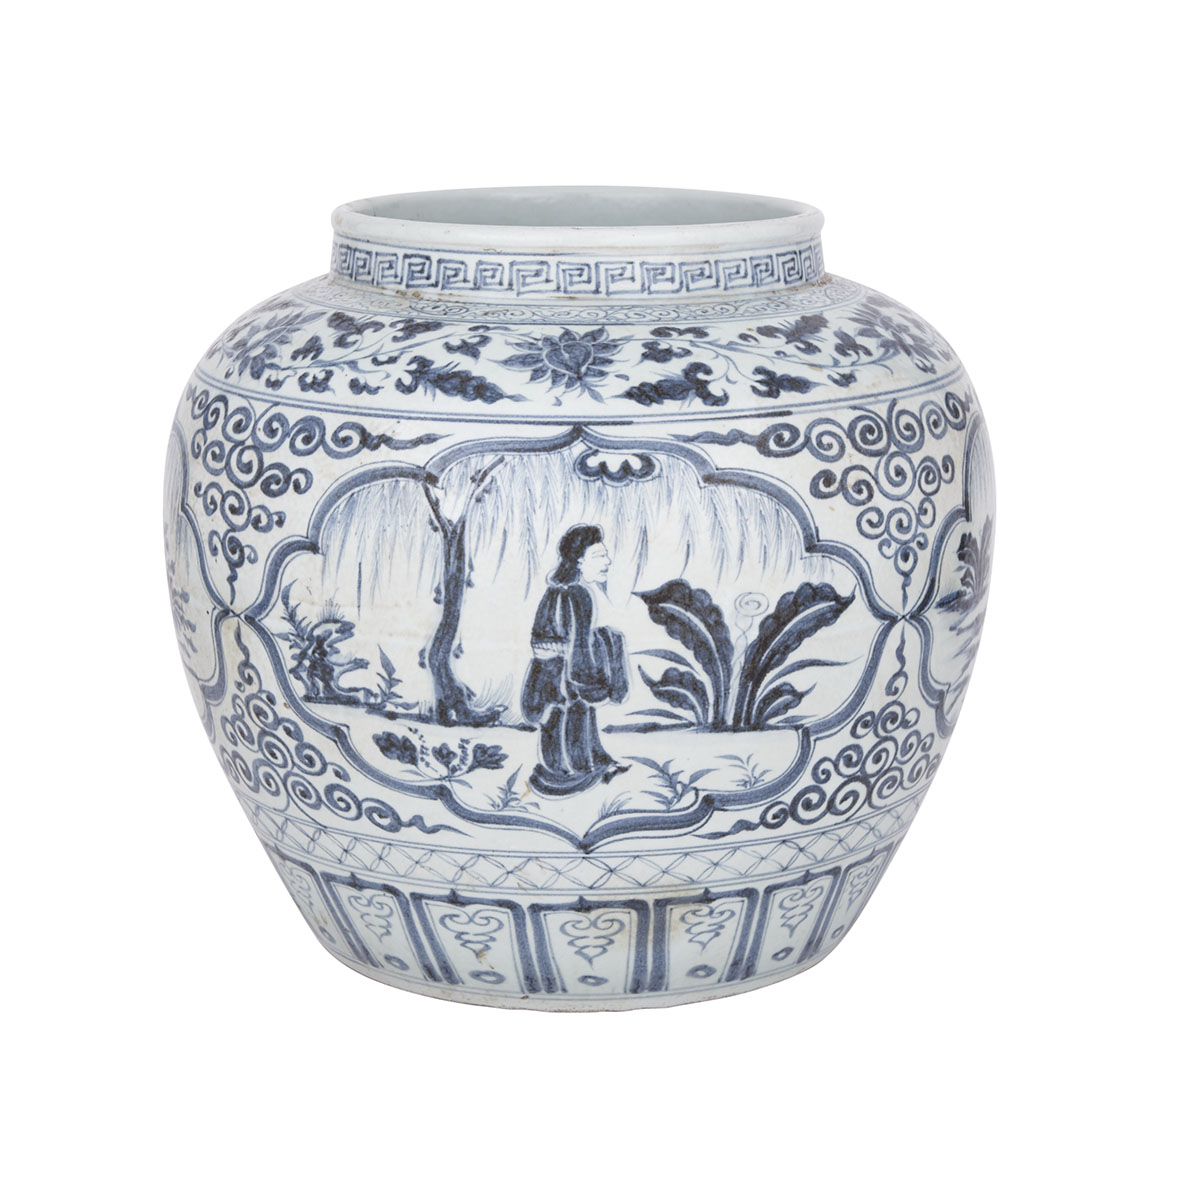 A Blue and White Figural Jar, Ming Dynasty or Later